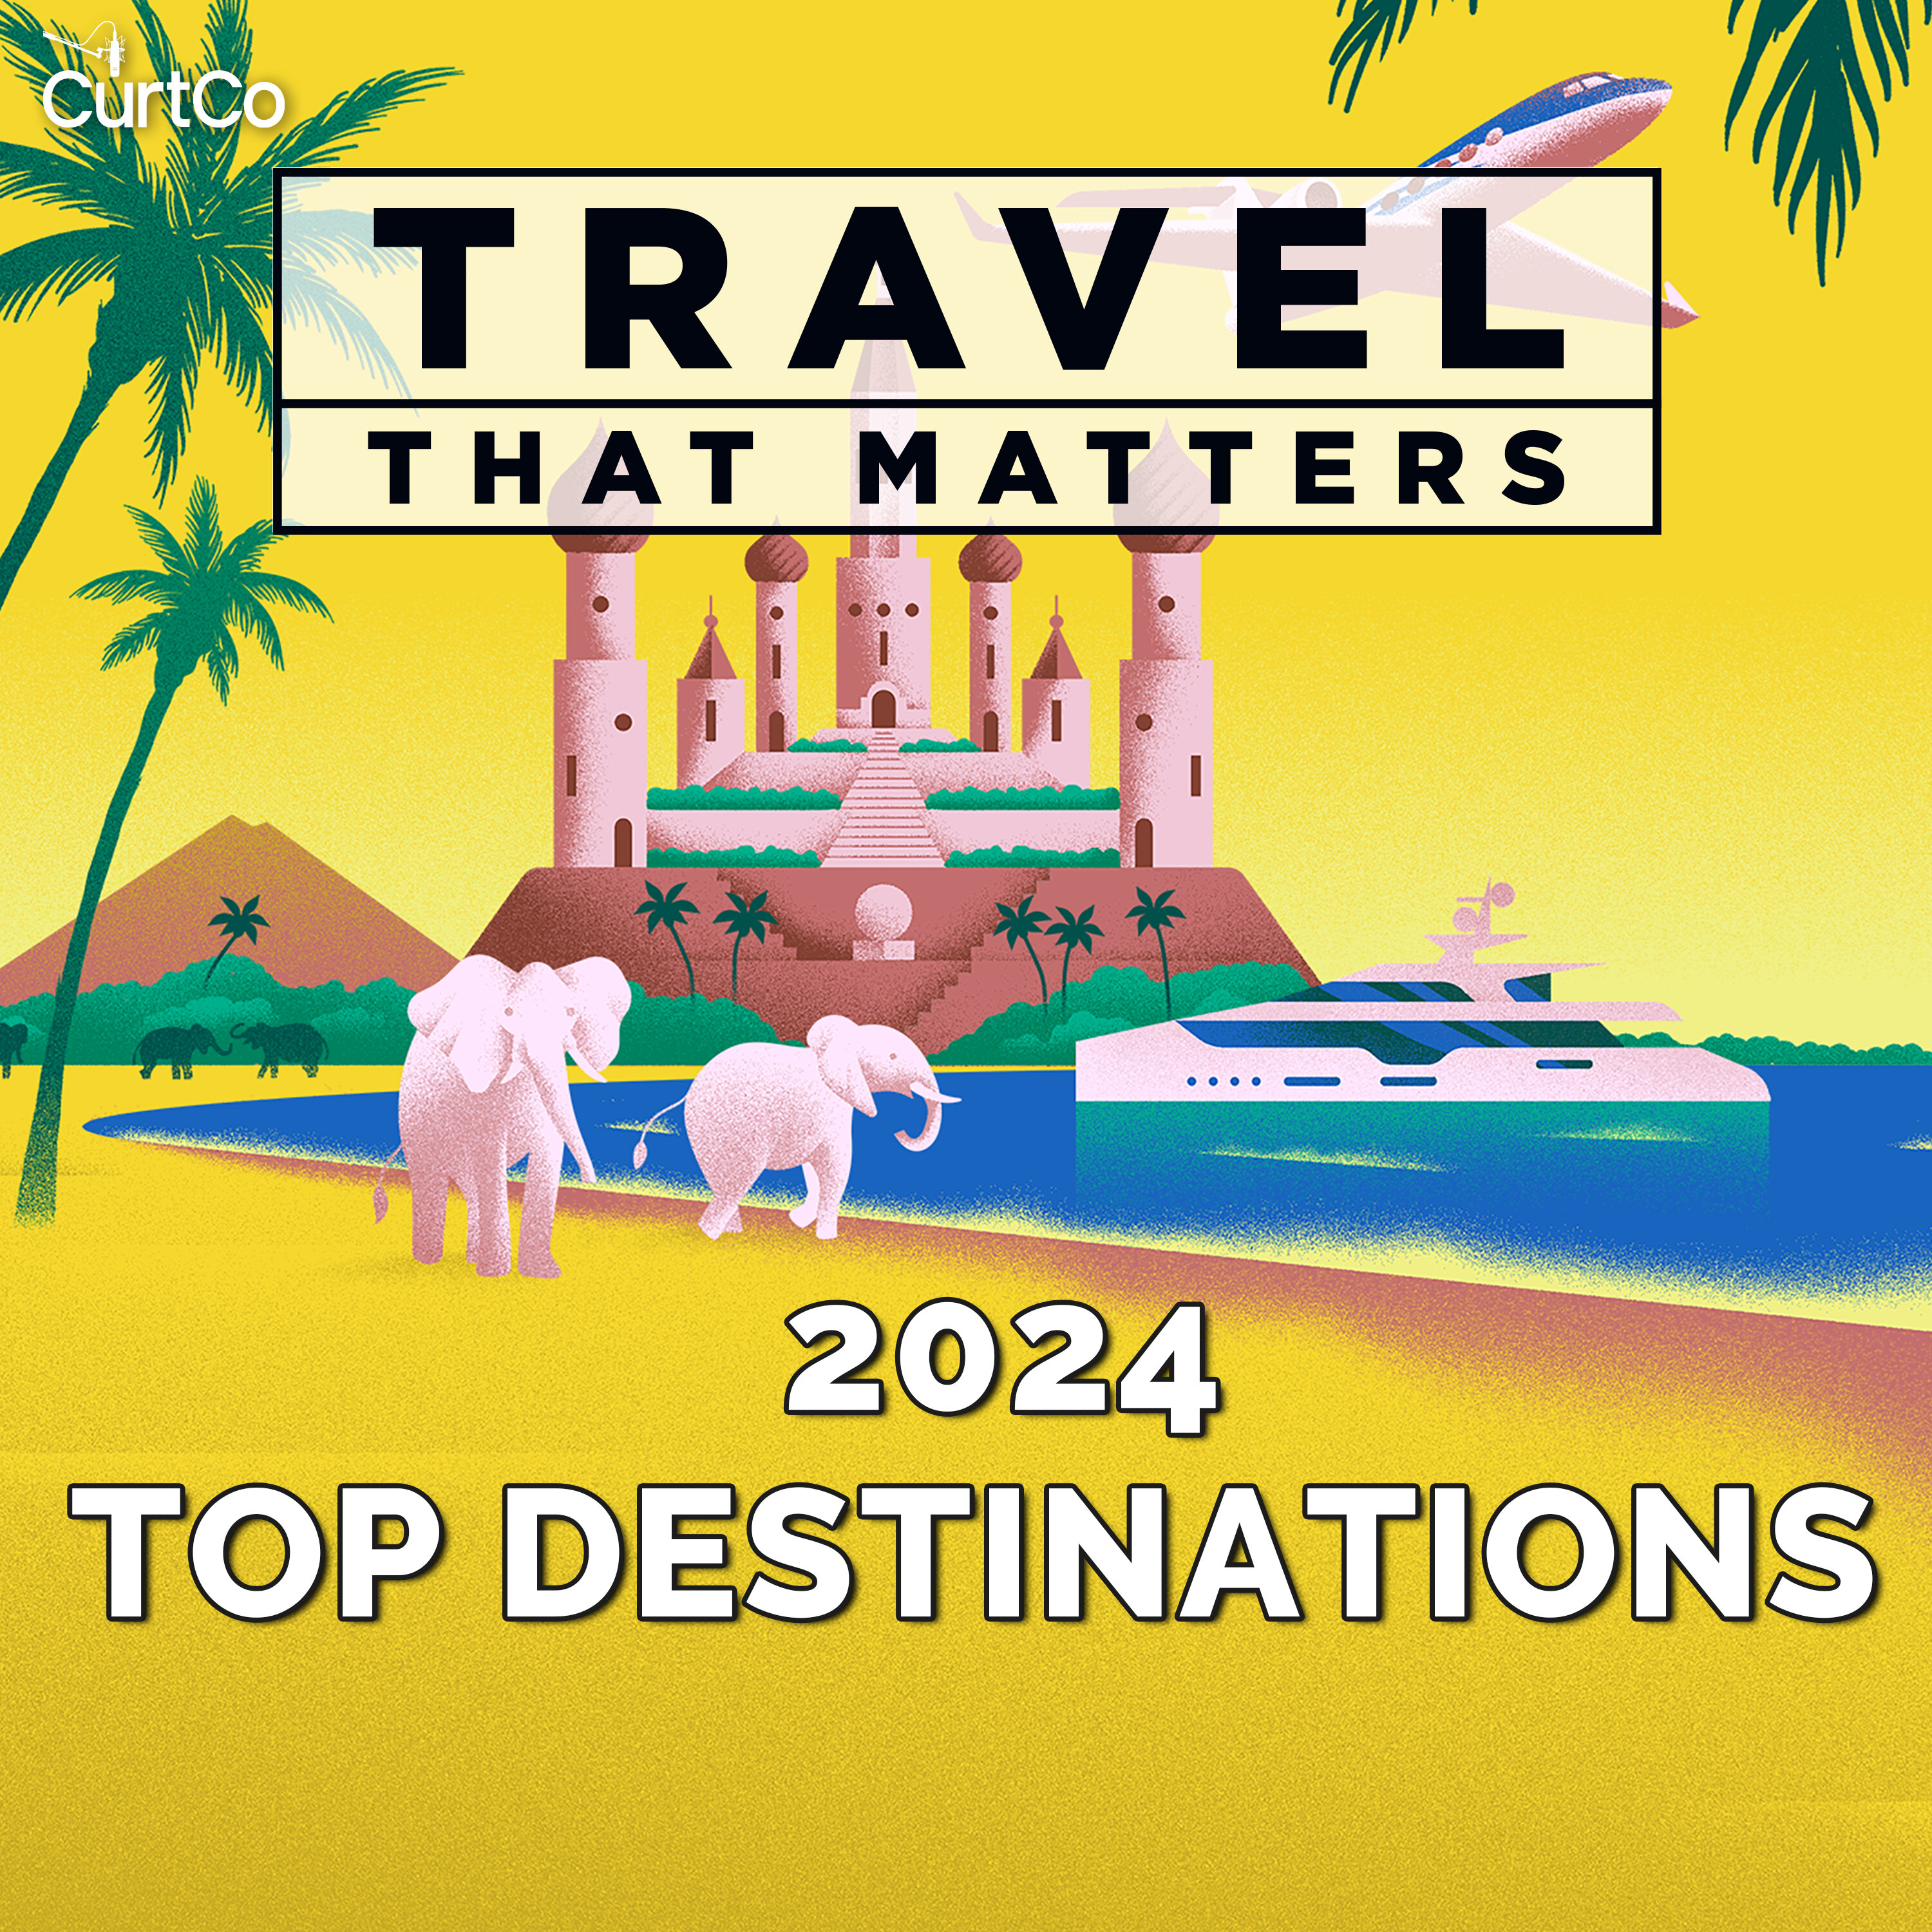 Top Destinations to Visit in 2024 and Why: Dubrovnik (Croatia), Norway, Buenos Aires (Argentina), New York City (United States), Costa Rica, Dolomites and Sardinia (Italy), Guaviare (Colombia), Singap